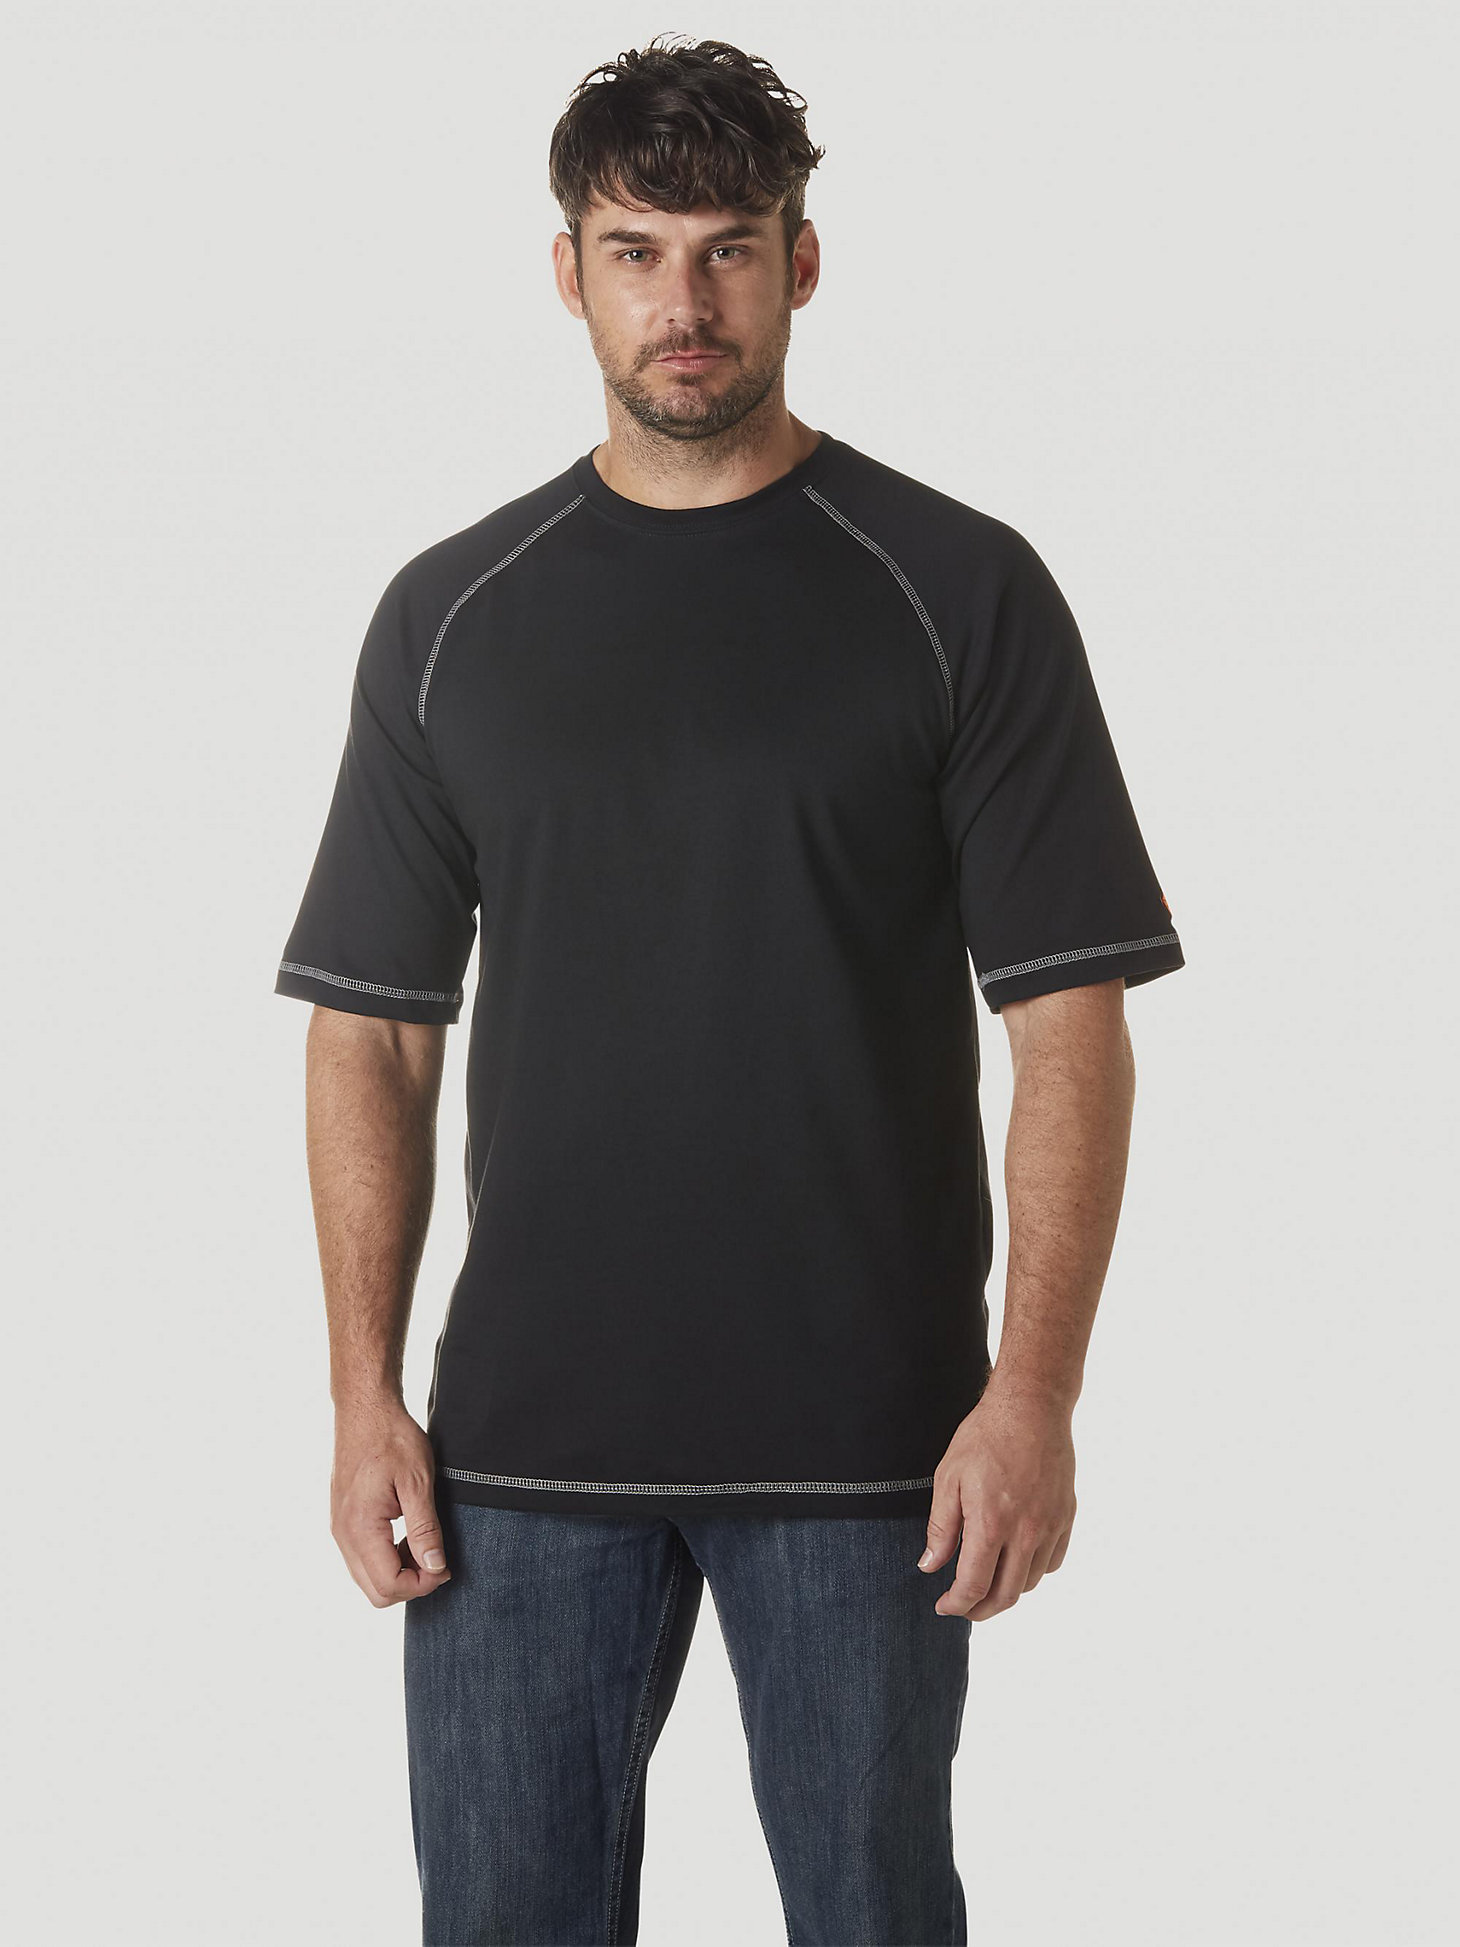 Wrangler® FR Flame Resistant Short Sleeve Base Layer T-Shirt in Black main view